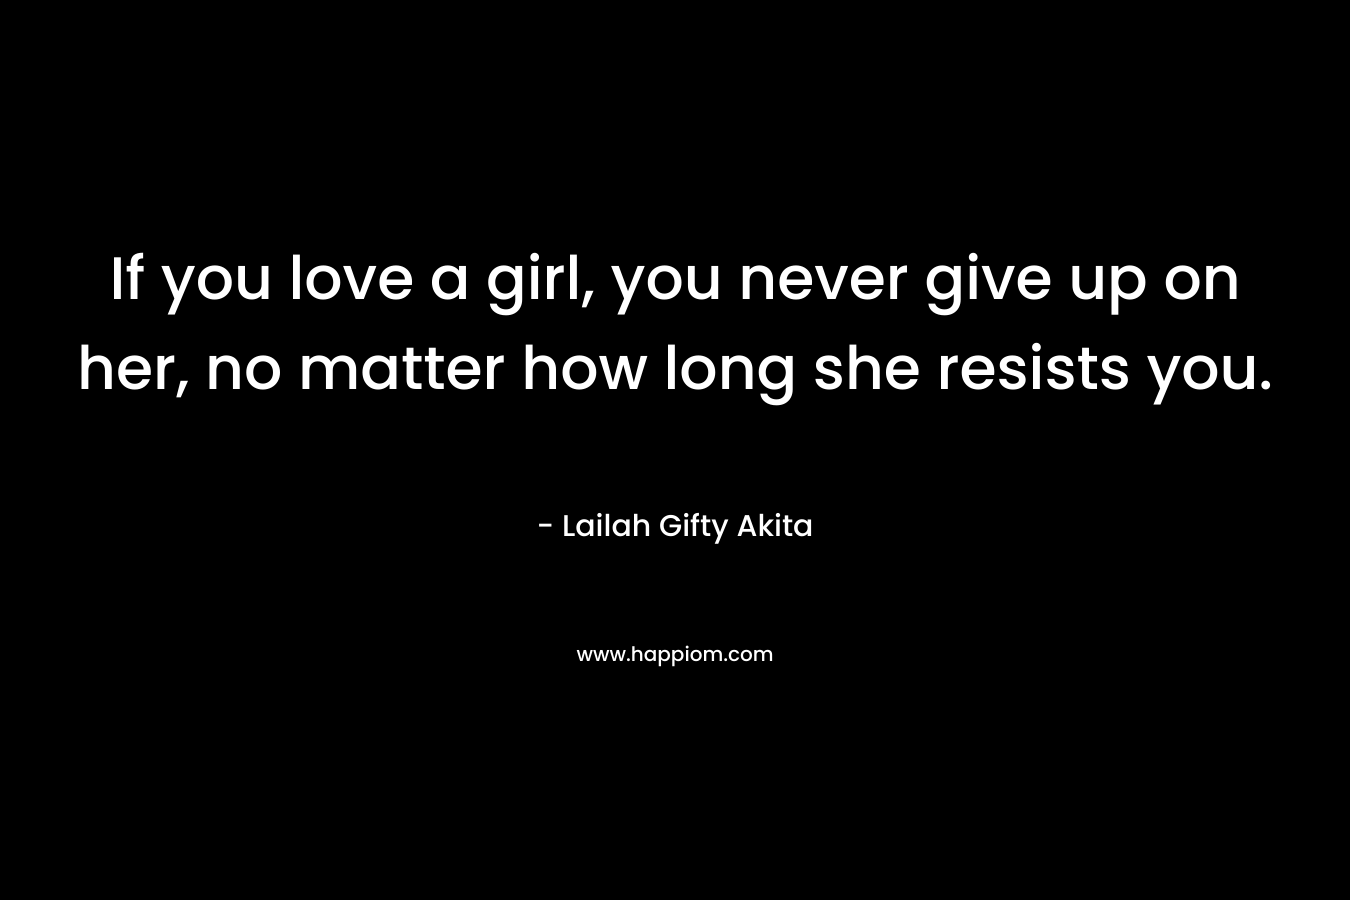 If you love a girl, you never give up on her, no matter how long she resists you.